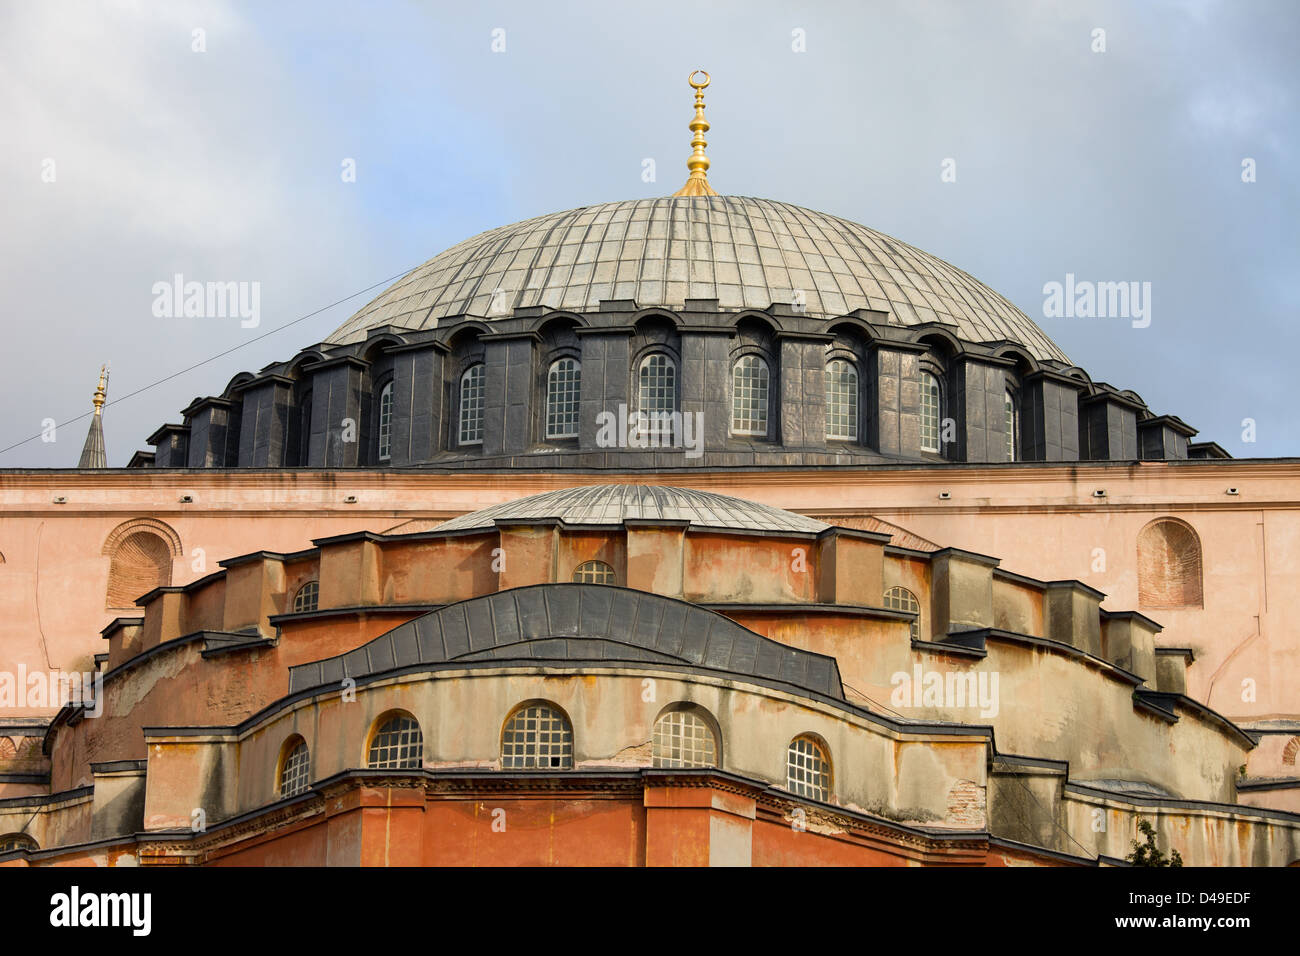 Byzantine style architectural details of the Hagia Sophia in Istanbul, Turkey. Stock Photo